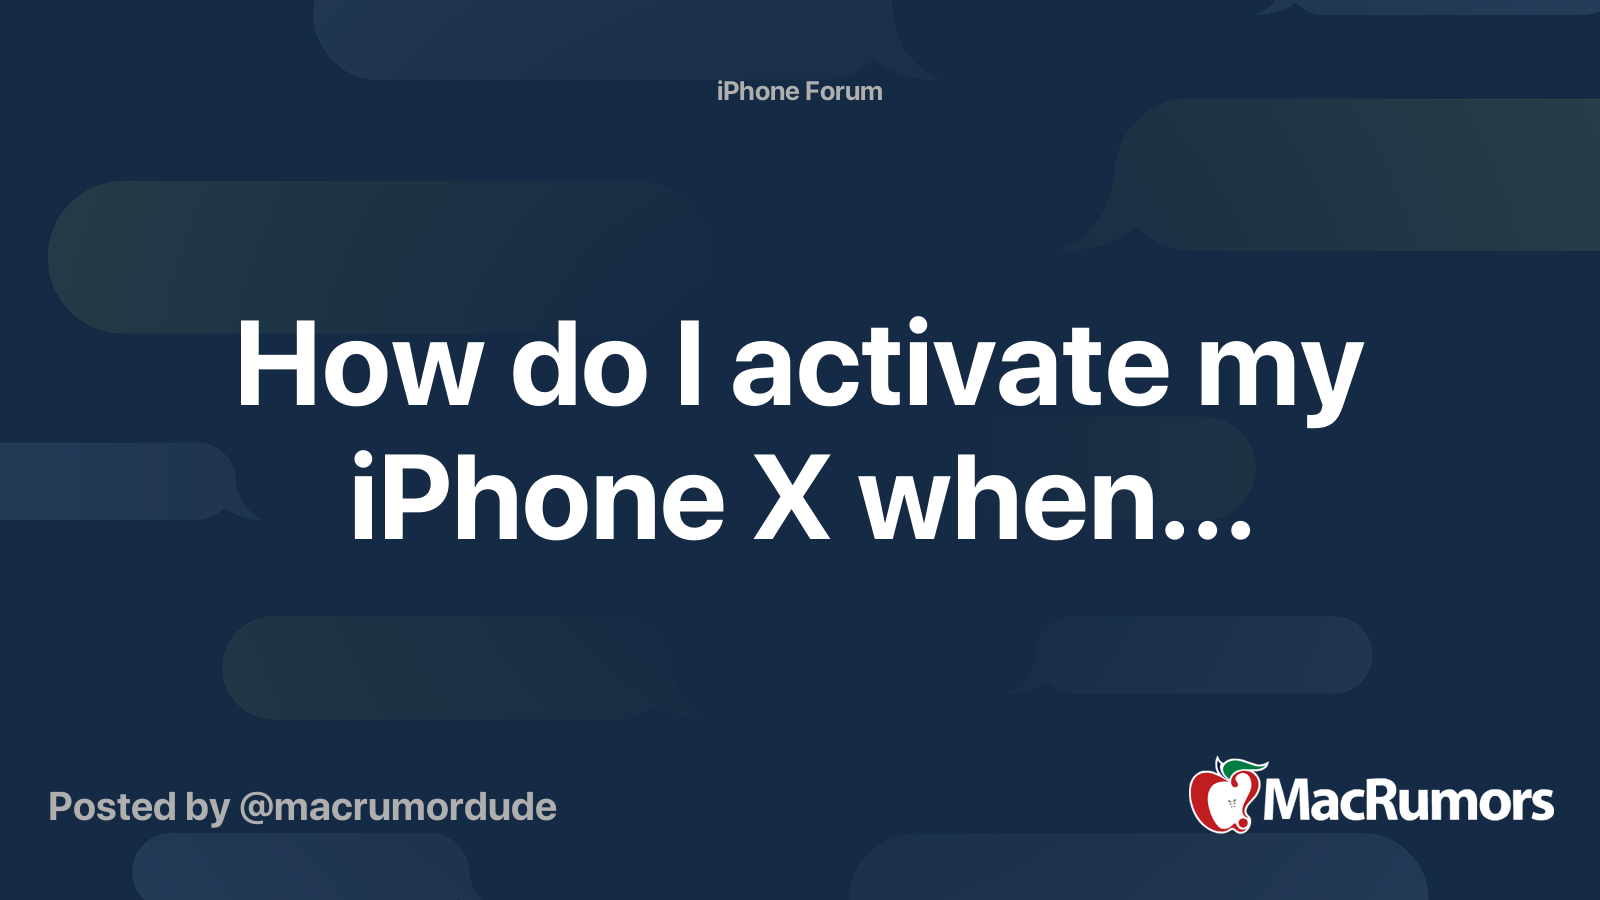 How do I activate my iPhone X when... MacRumors Forums